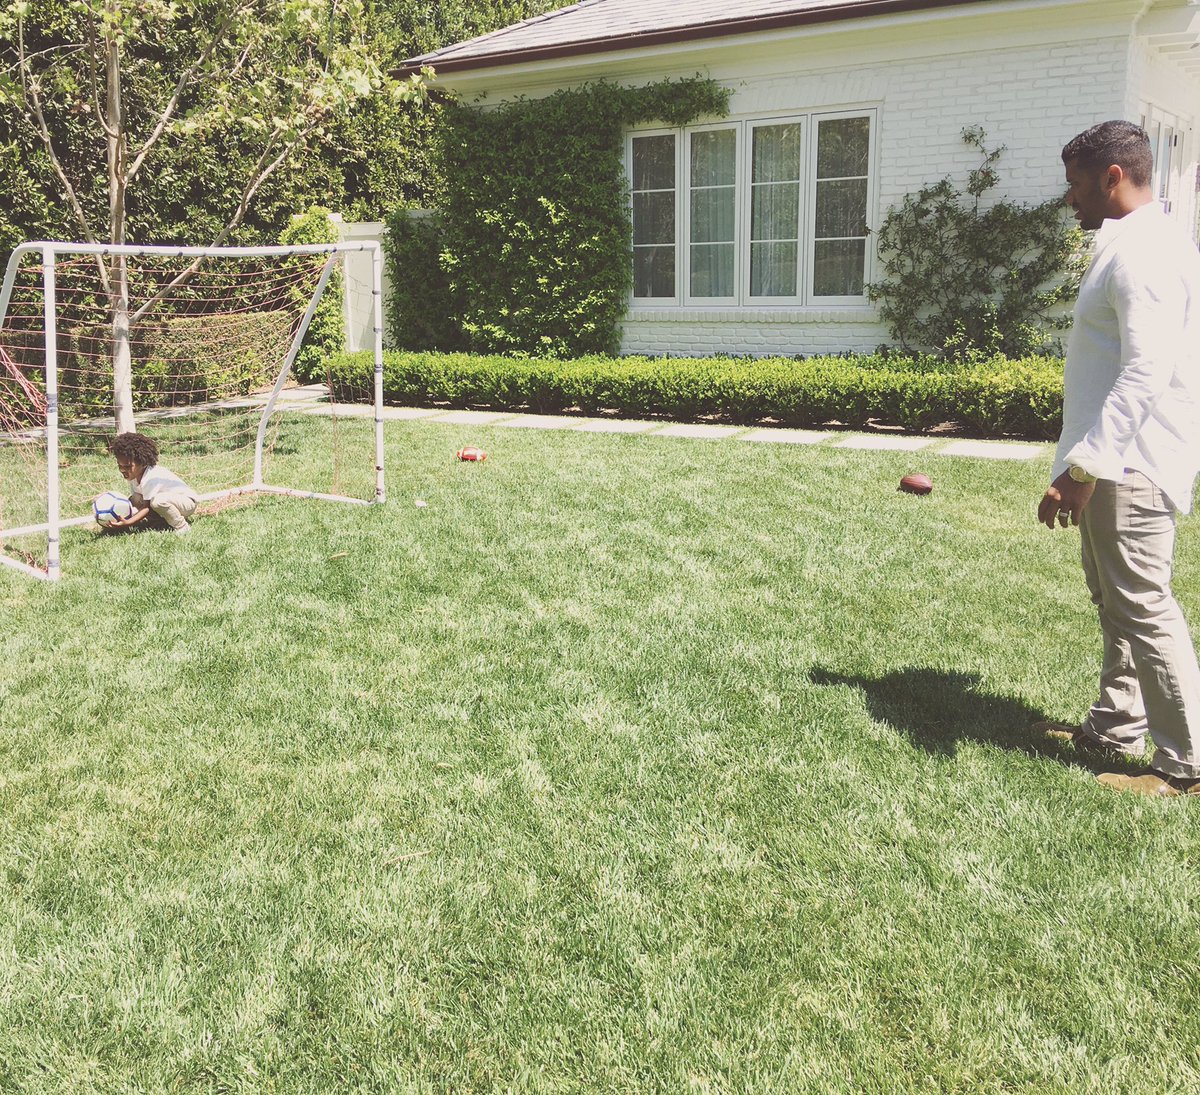 Goal!! #Easter Fun With My Boys! ????❤️ https://t.co/Gsgs5lr3Bf